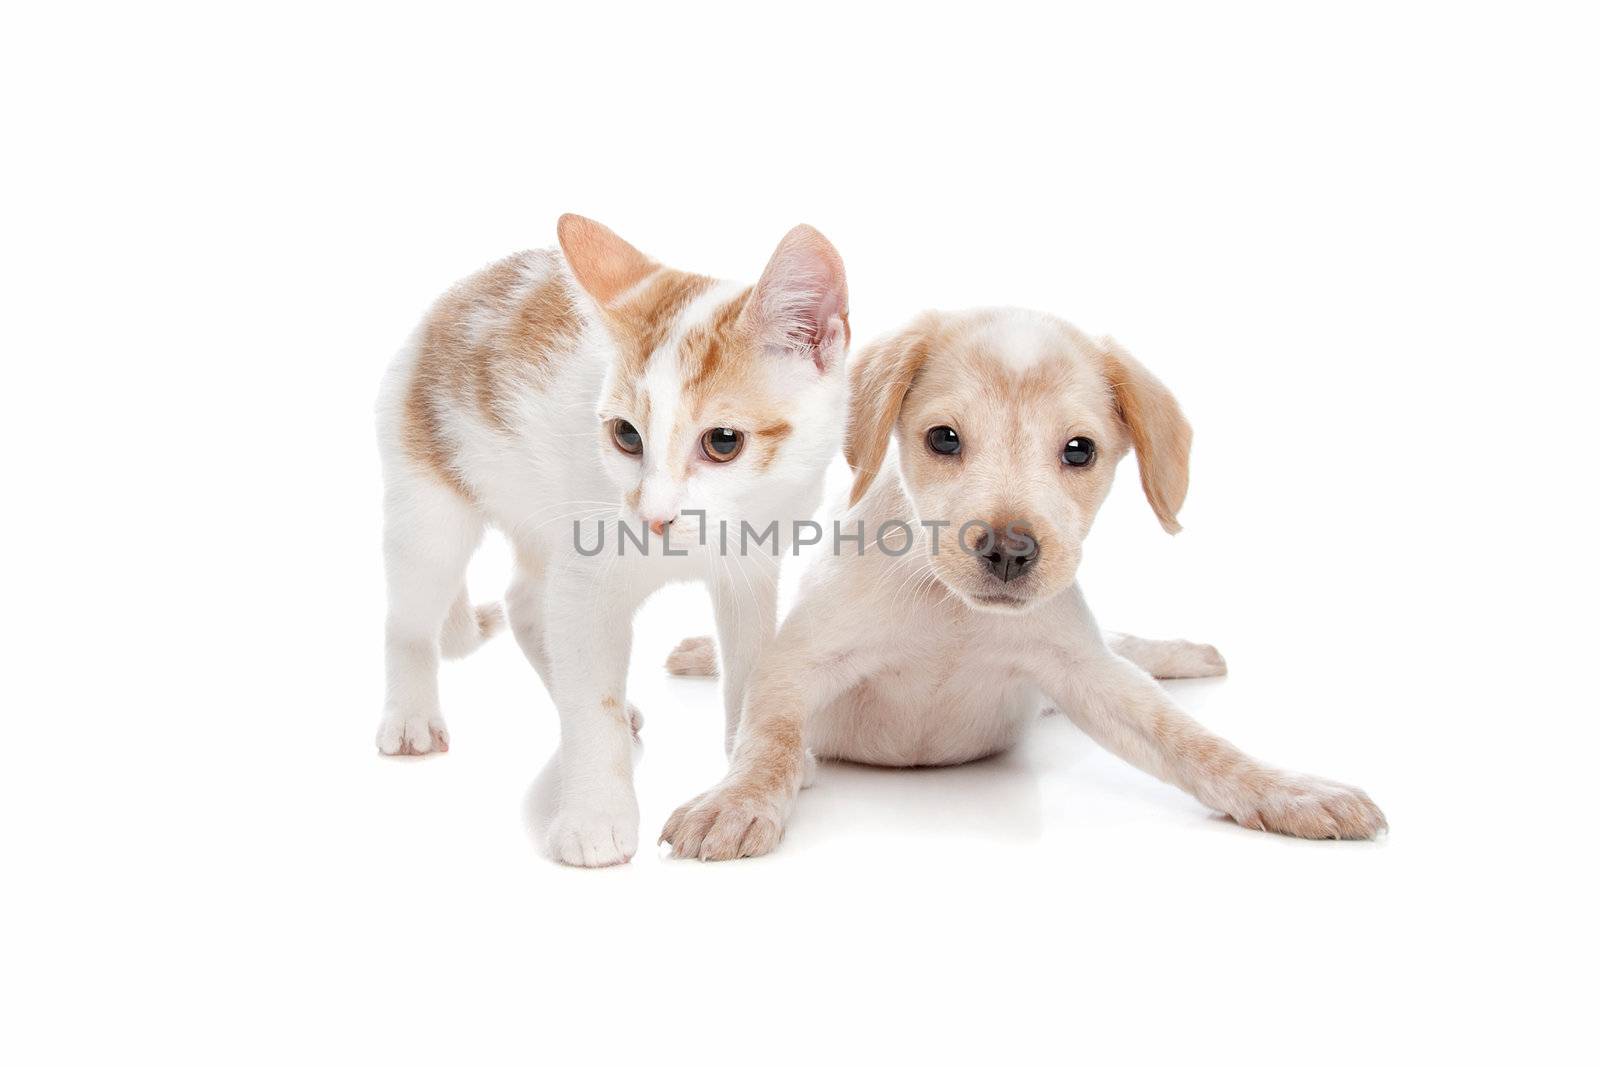 Puppy and kitten in front of a white background